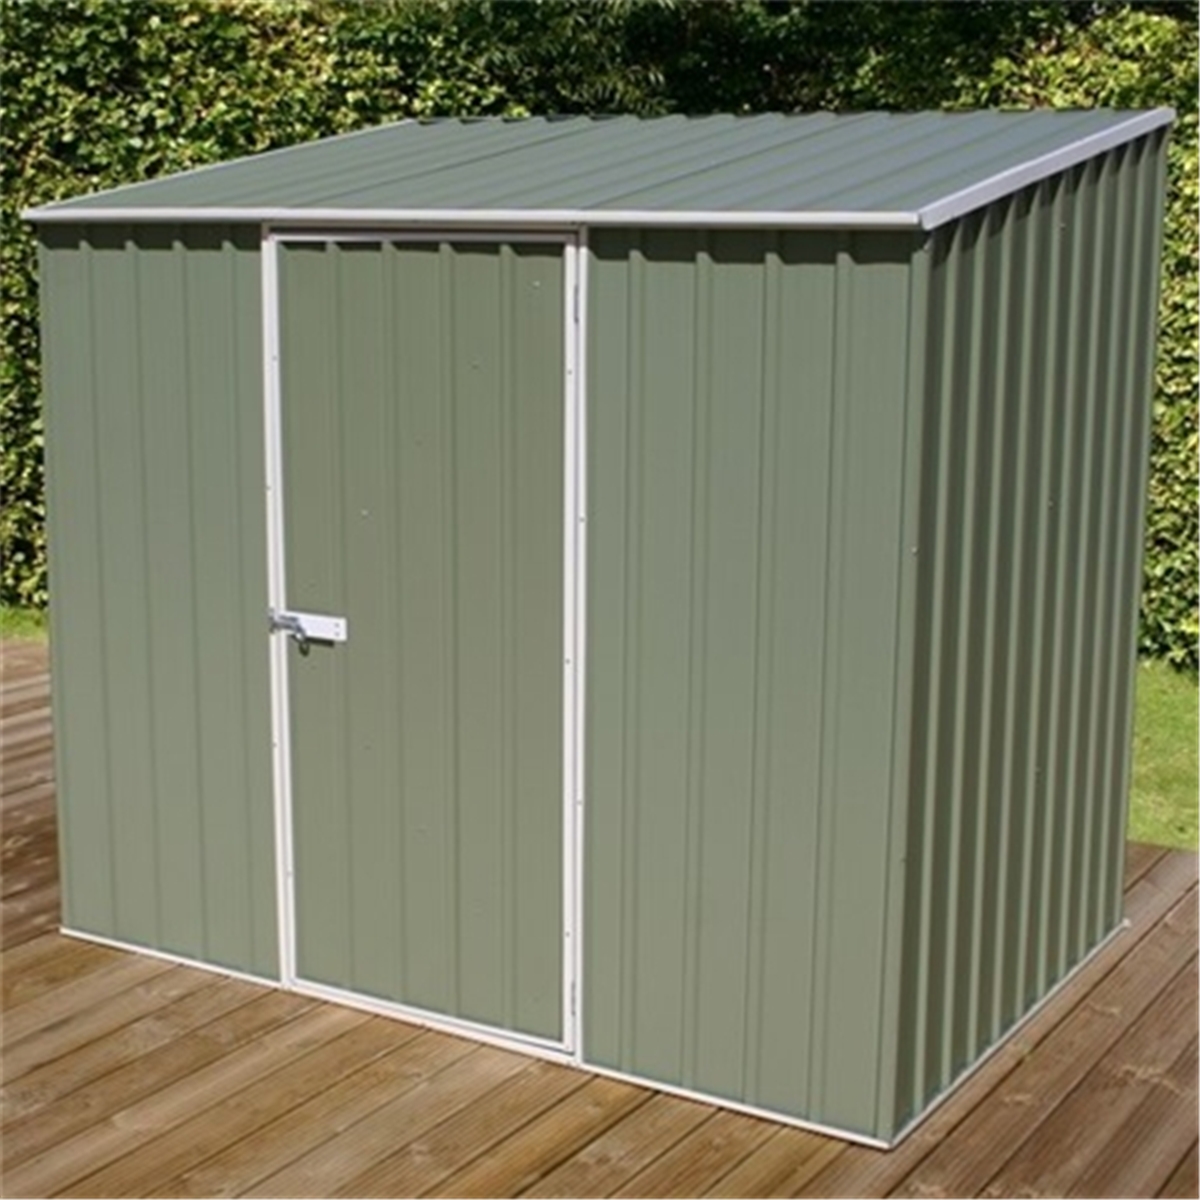 12ft x 8ft summerhouse shed installation